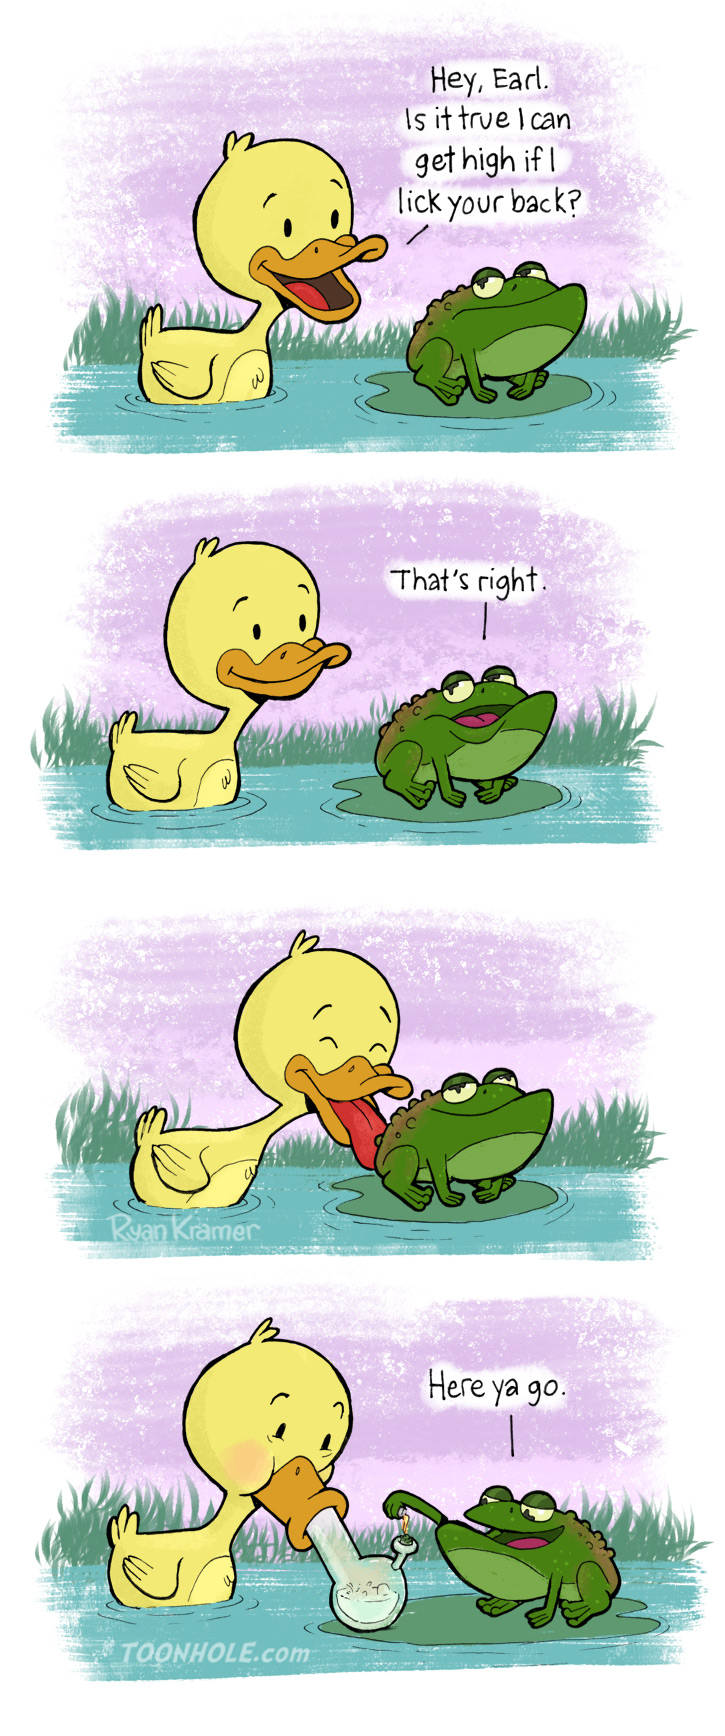 Duck wants to get high